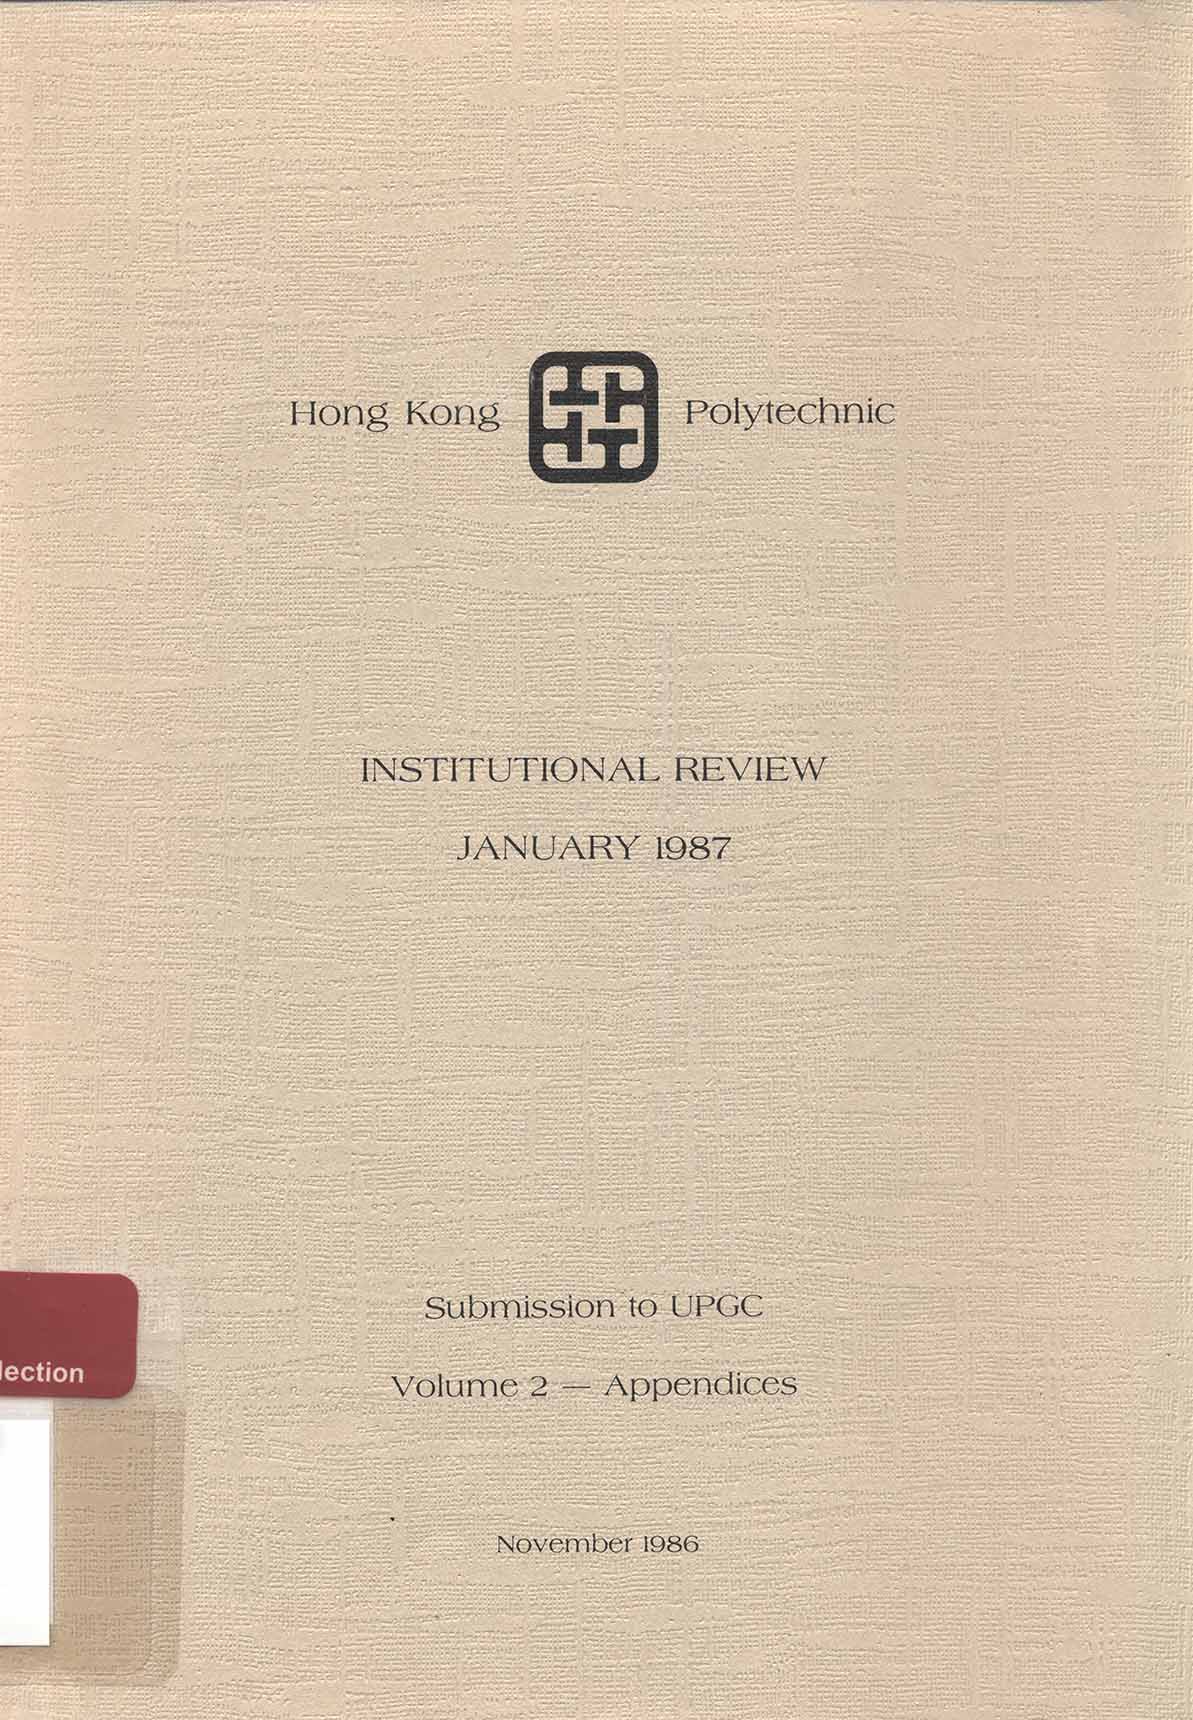 Institutional review, January 1987 : submission to UPGC  Volume 2 - Appendices